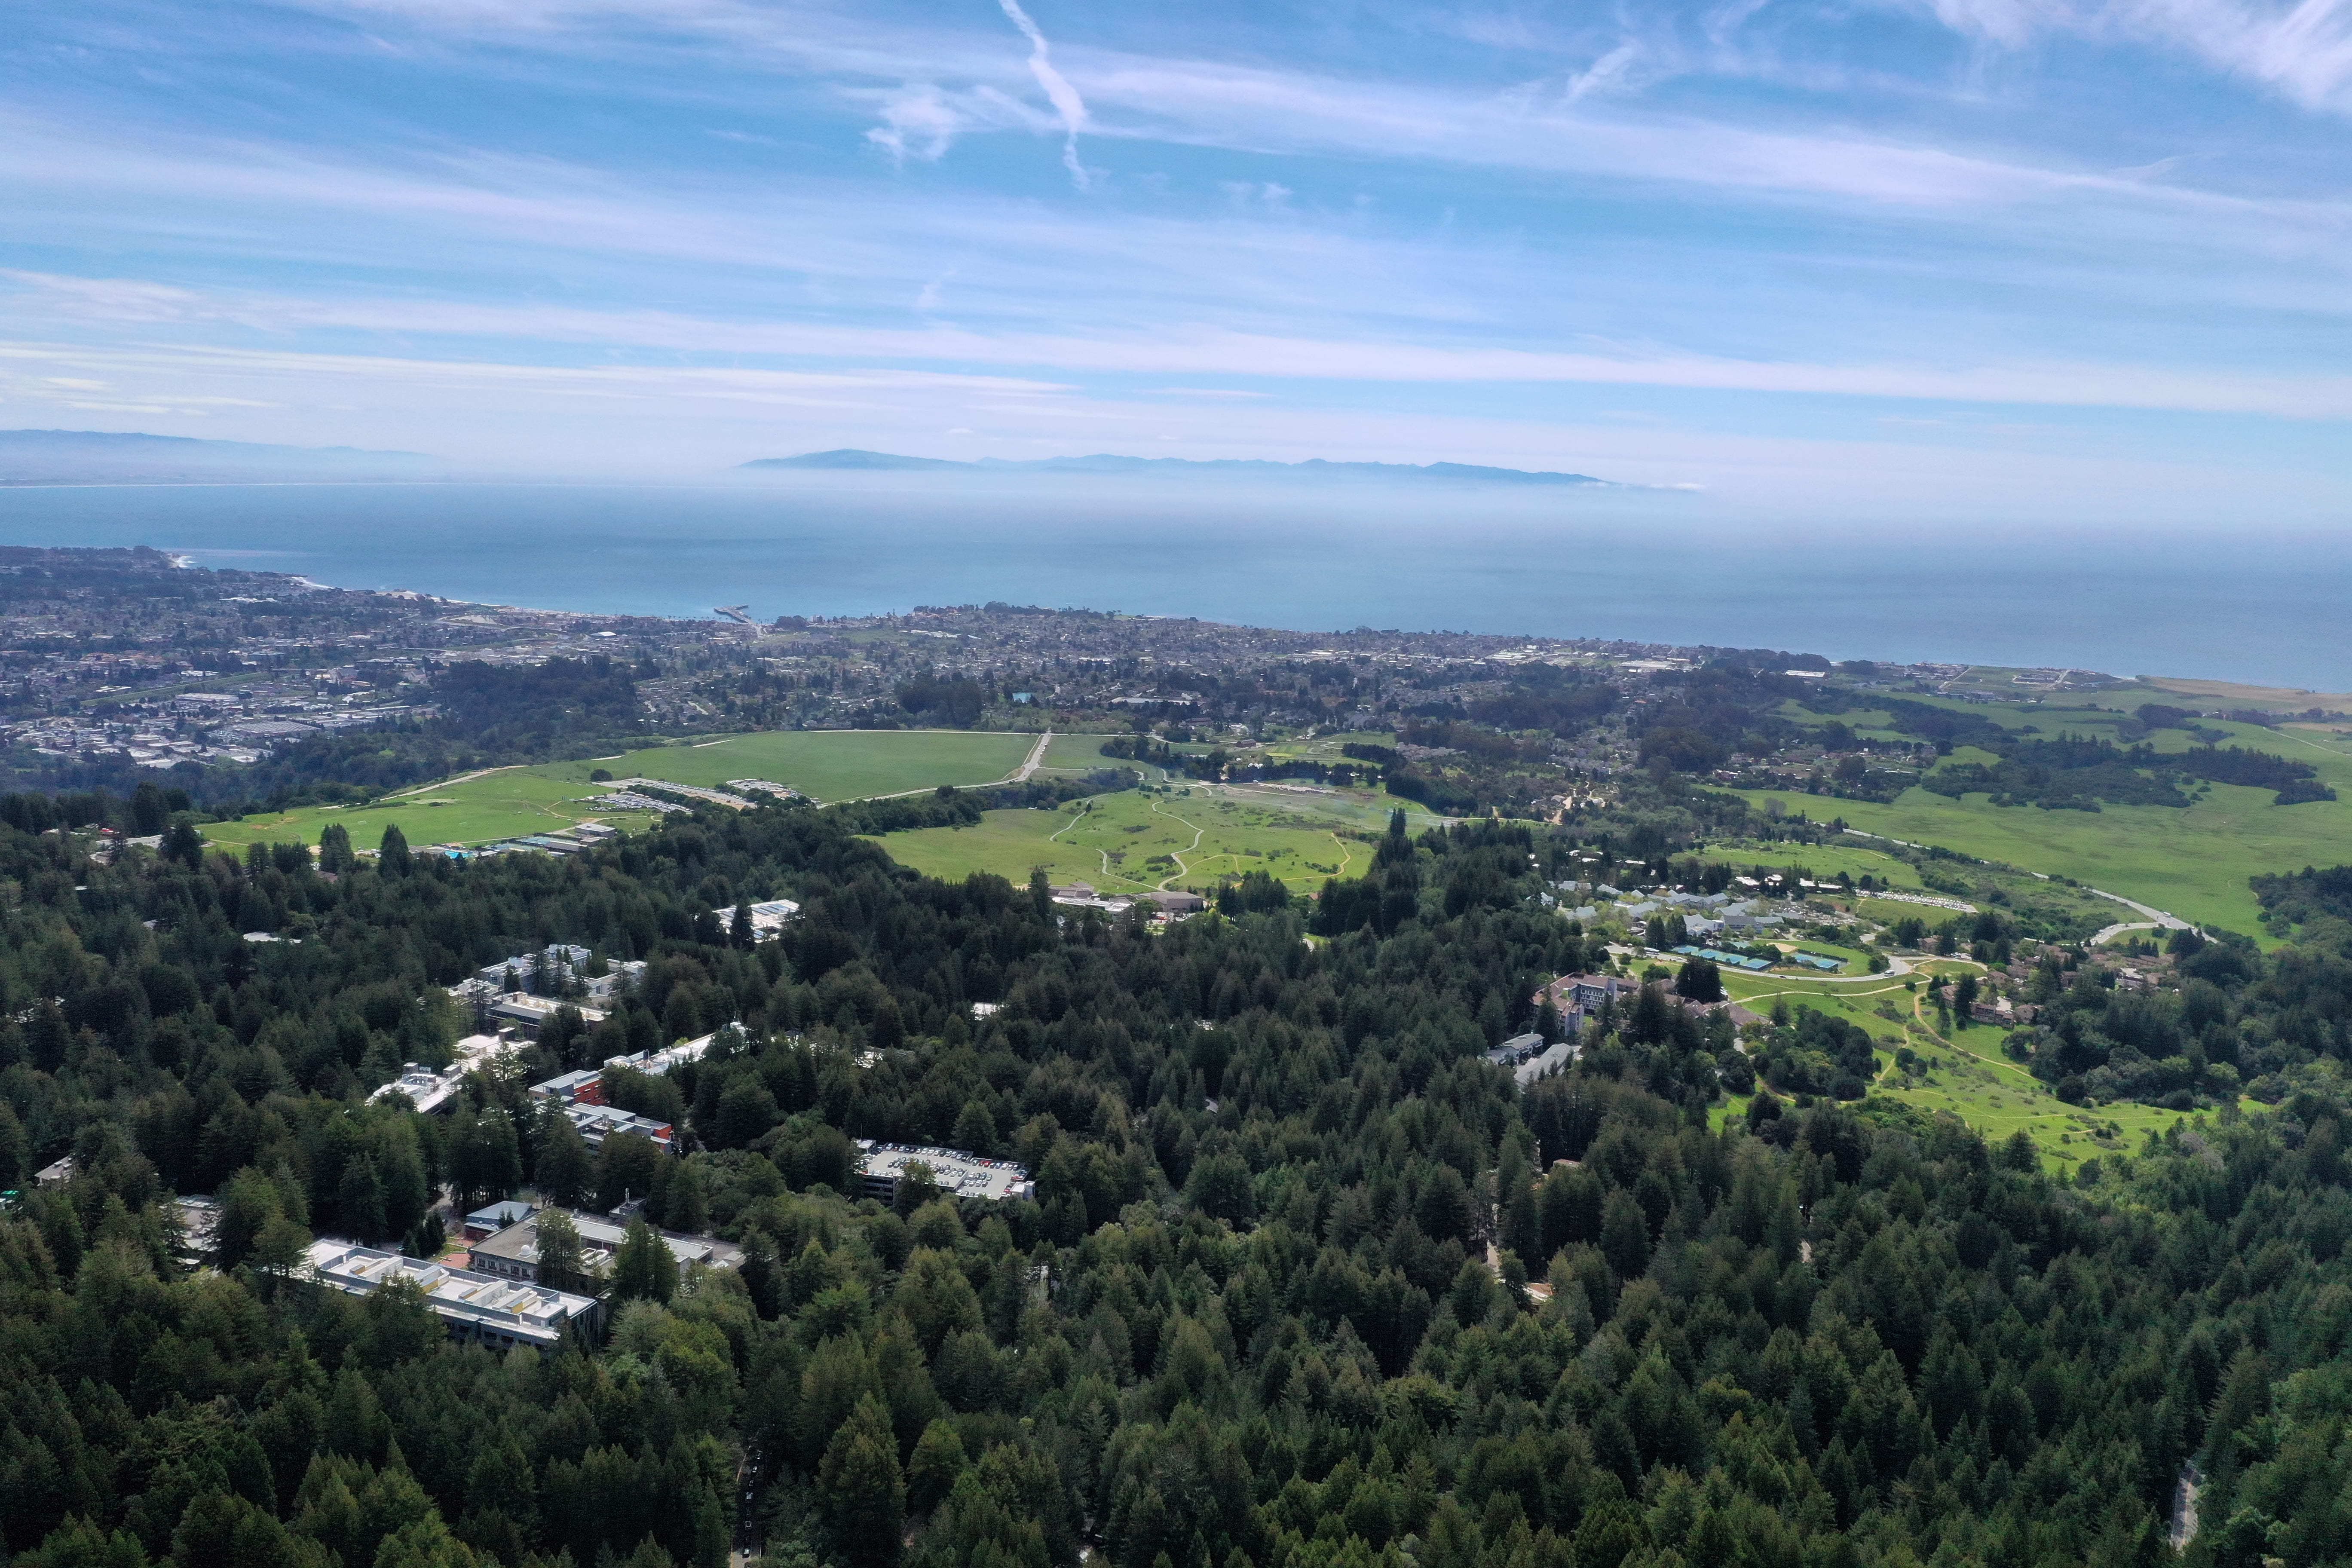 UCSC aerial photo of monterey bay and campus